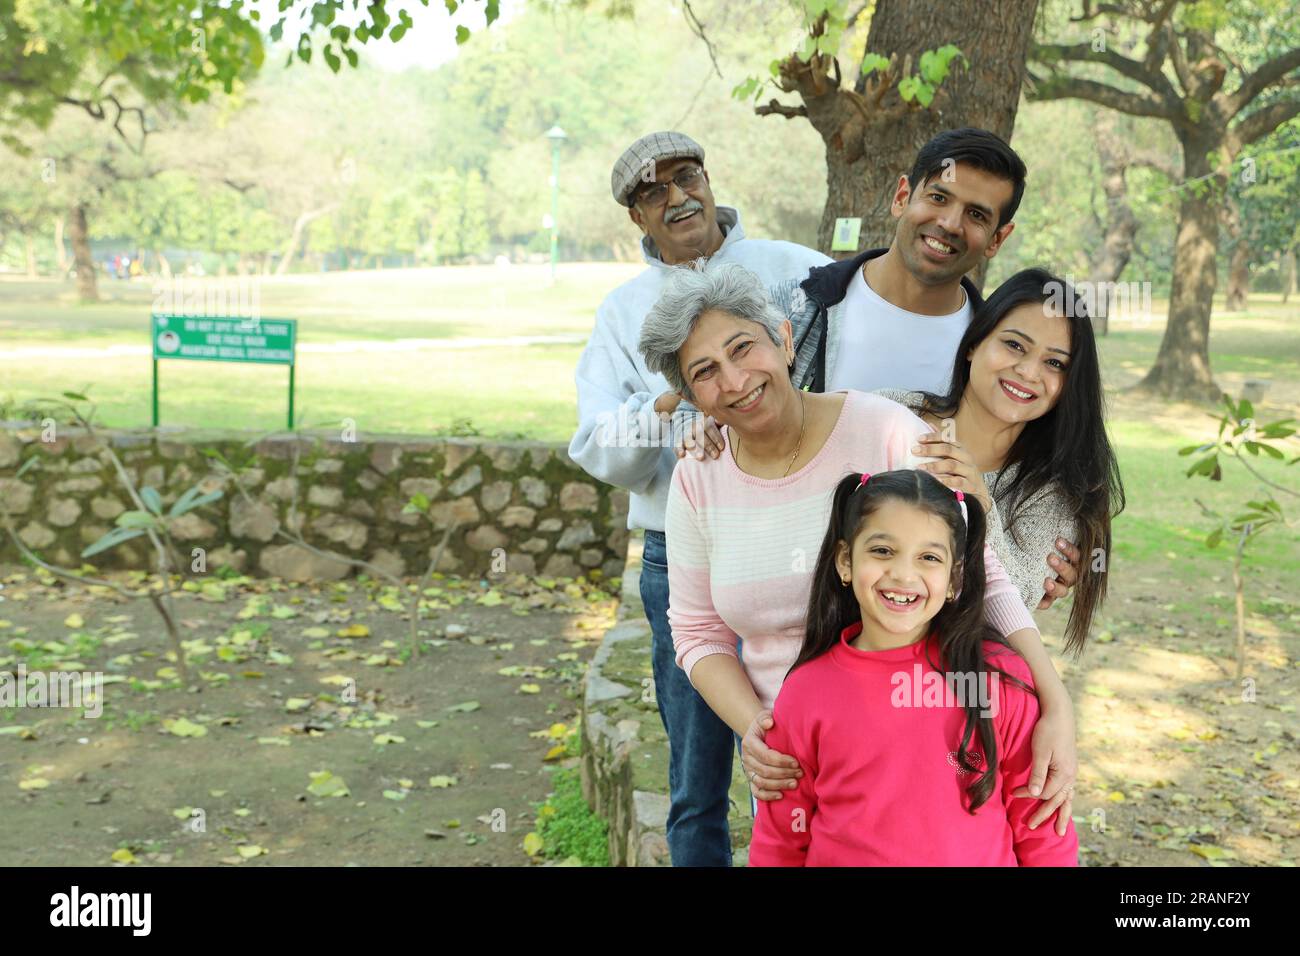 Grandparents enjoying with grand daughter in park, surrounded with greenery and serenity. They are having joyful and cheerful time together in greens. Stock Photo